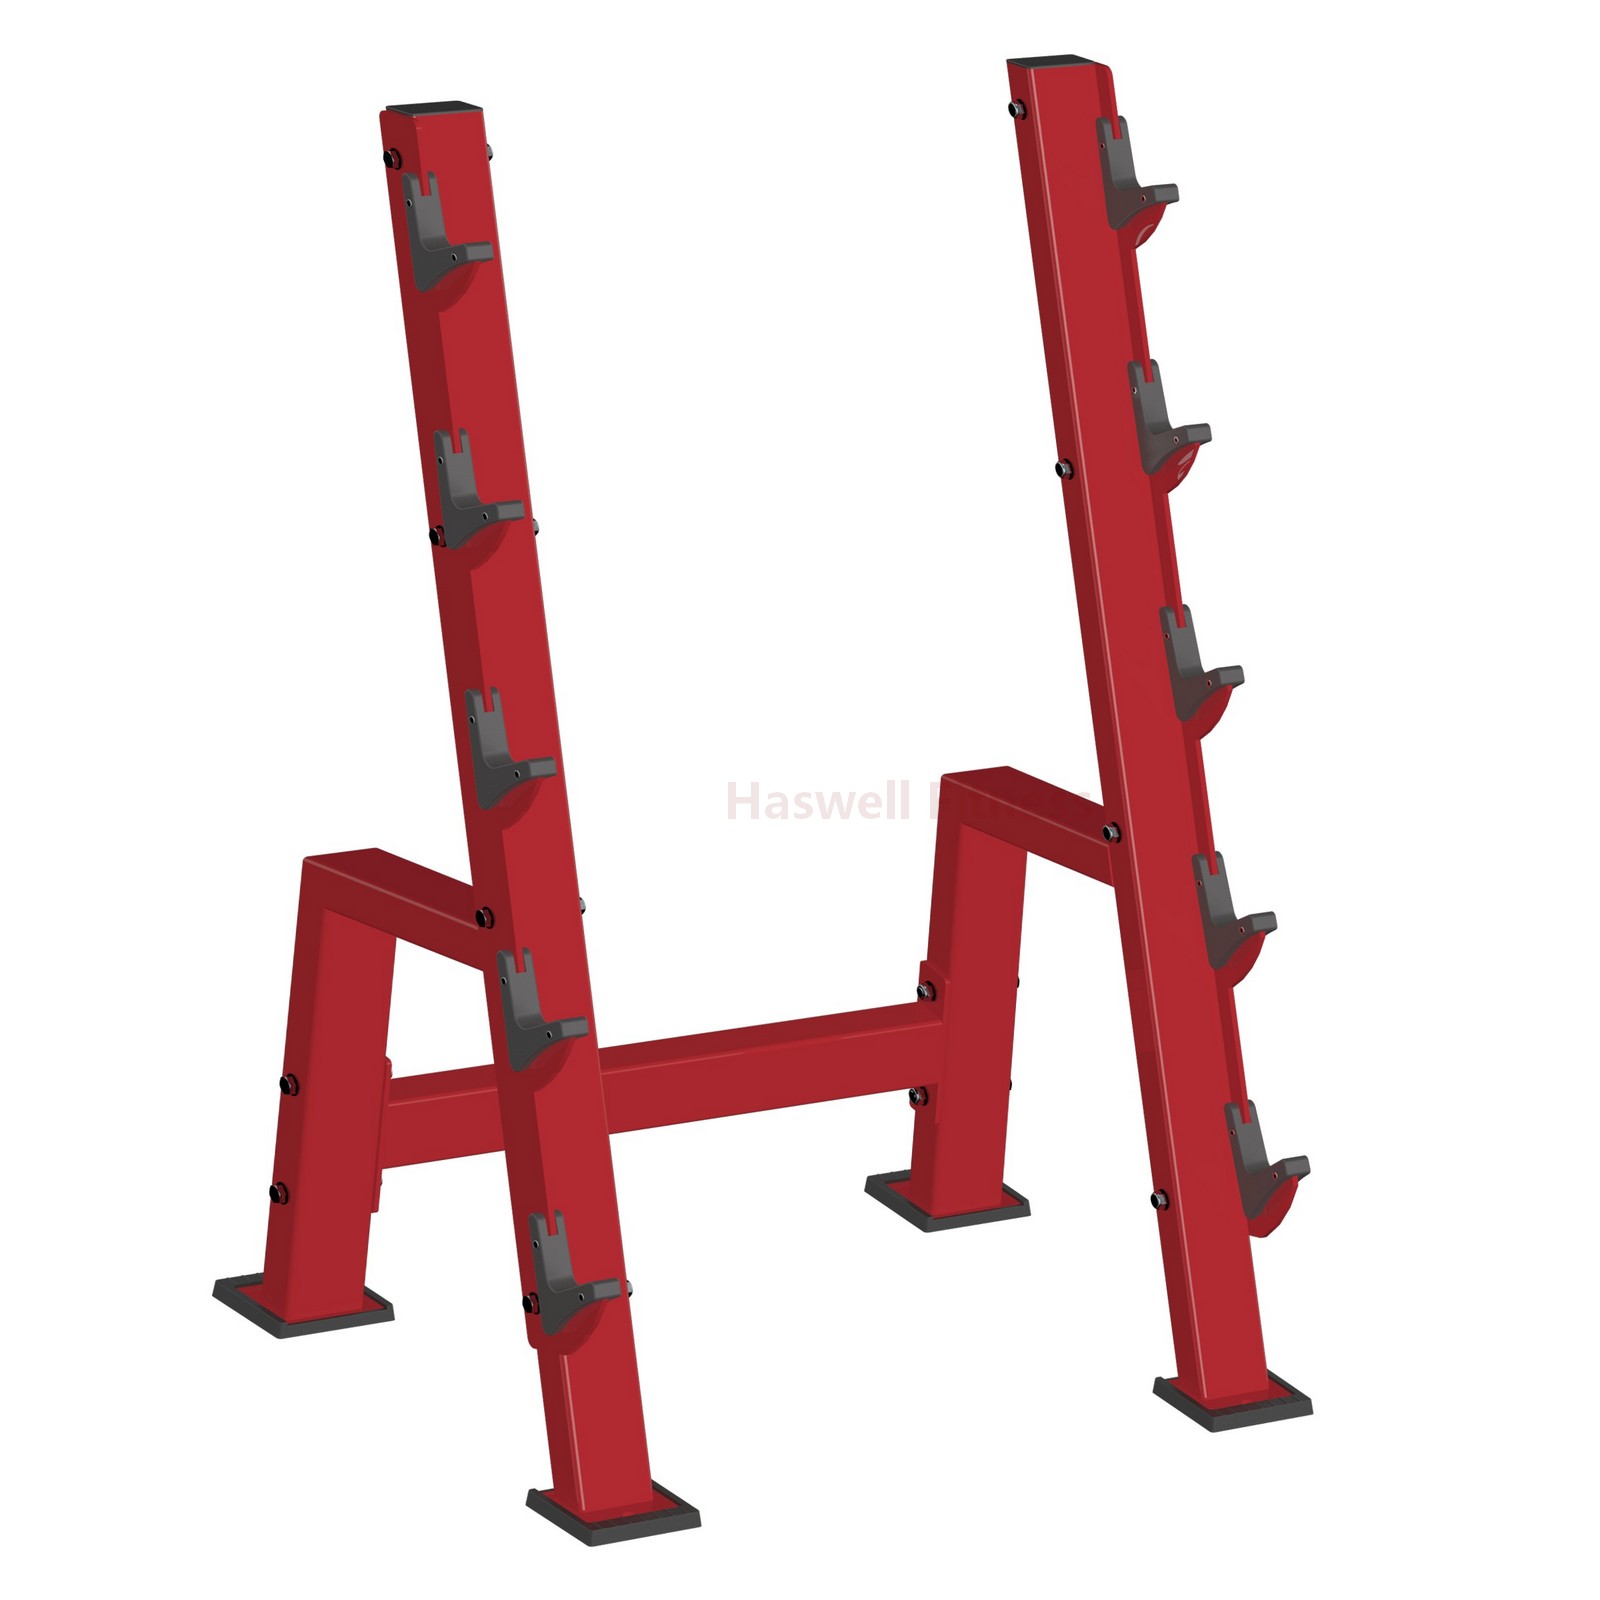 NH-164-2A Bar Rack Gym Machine from China Haswell